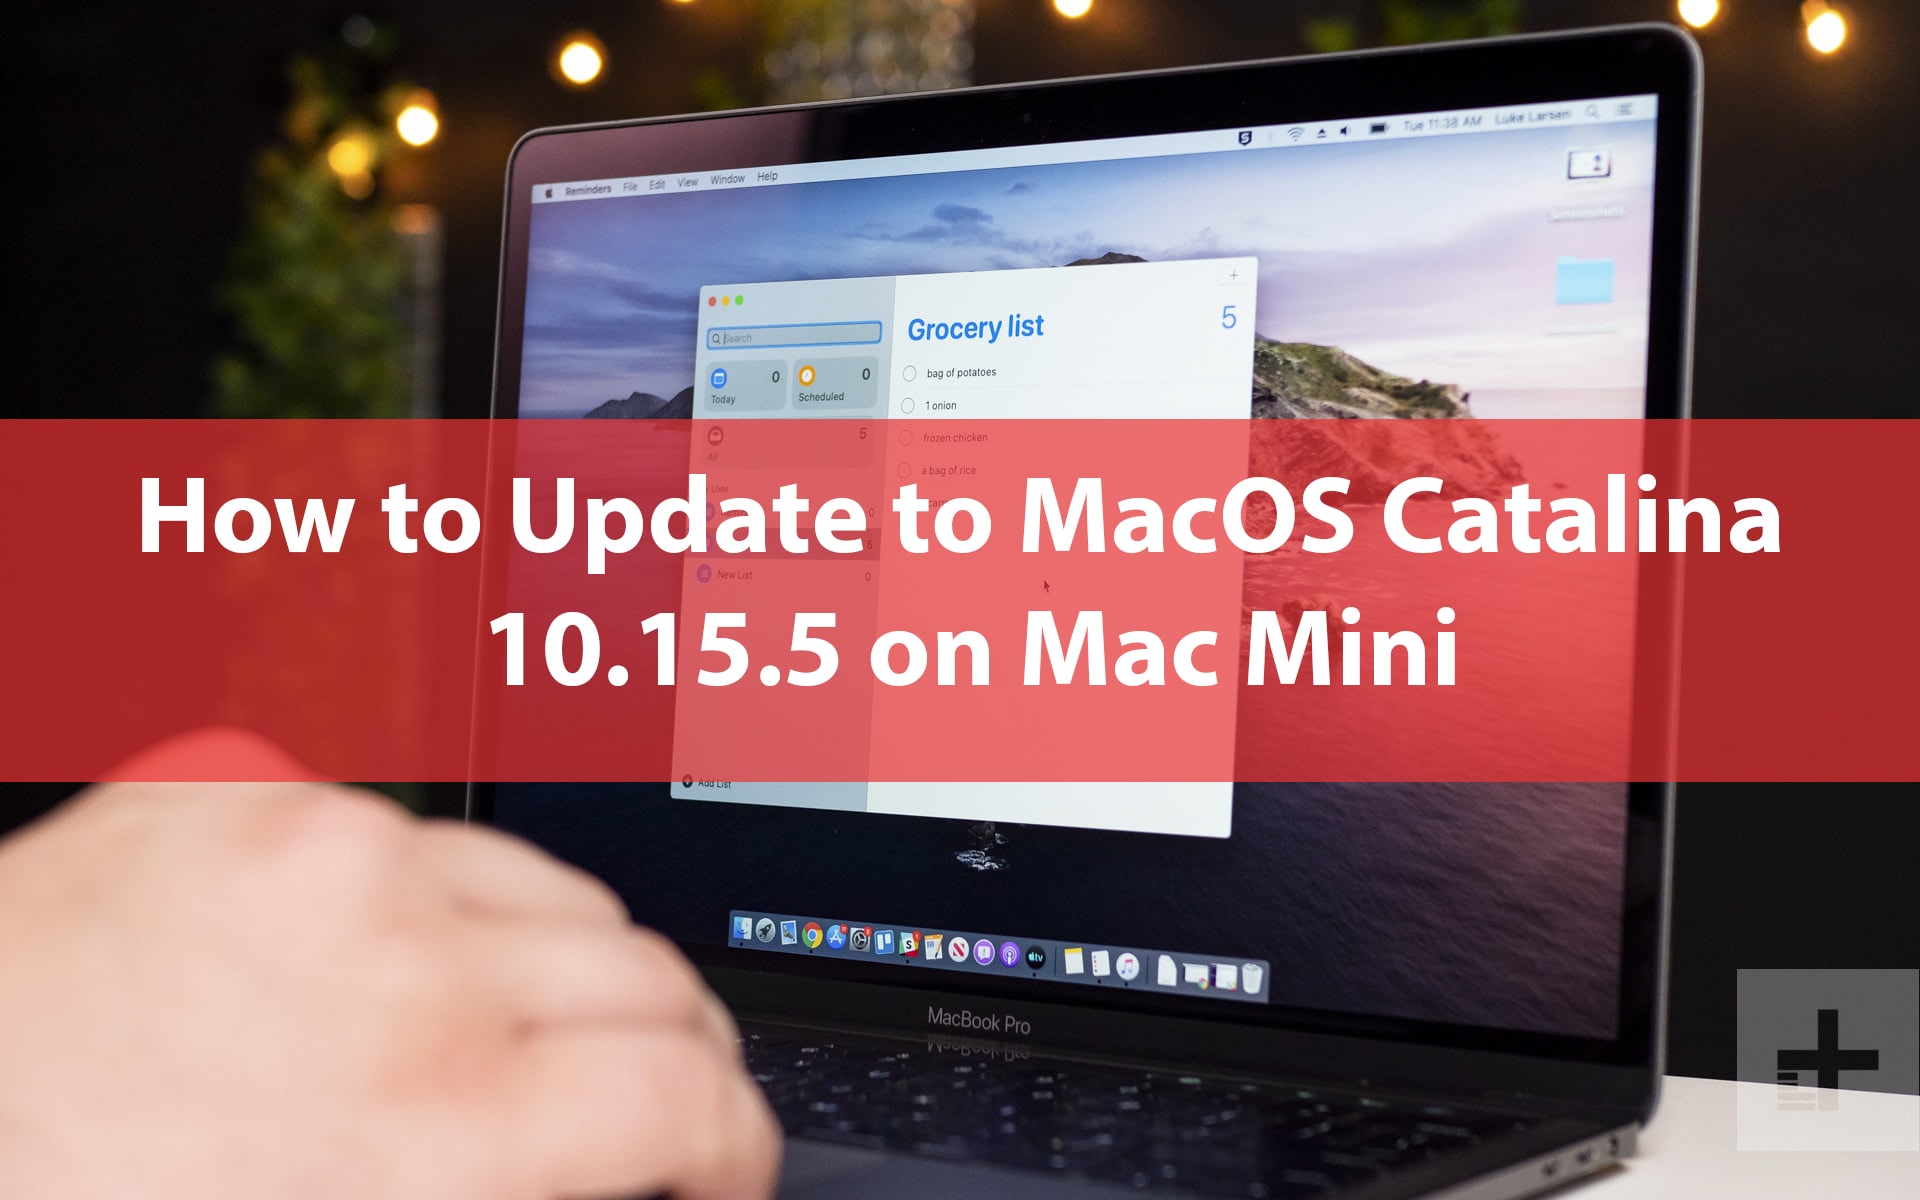 How to Update to MacOS Catalina 10.15.5 on Mac Mini